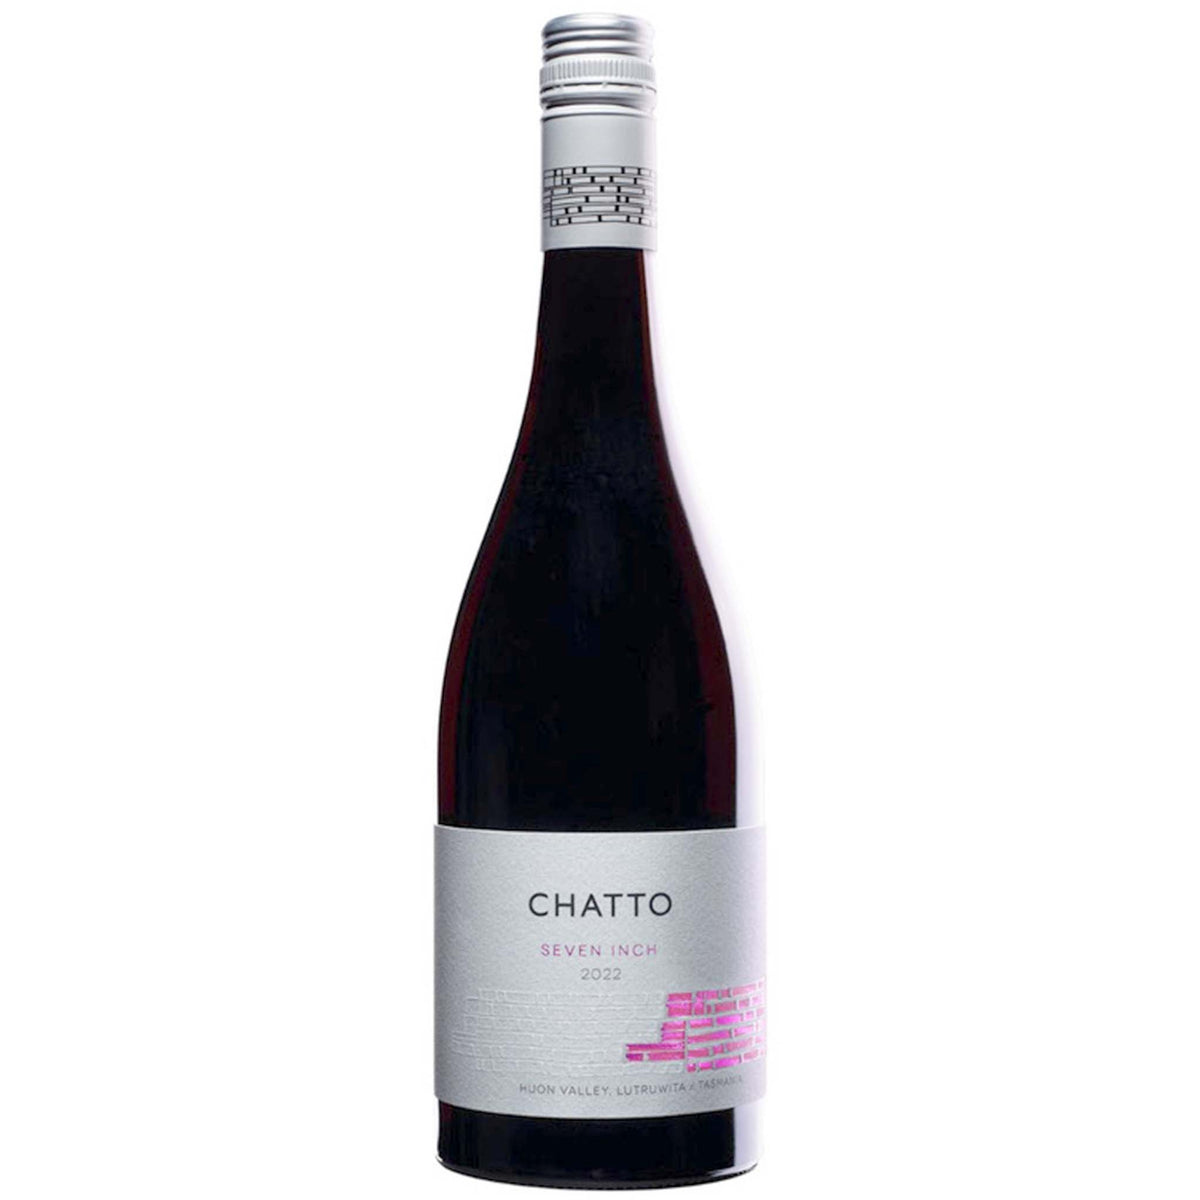 Chatto-Seven-Inch-Pinot-Noir-2022